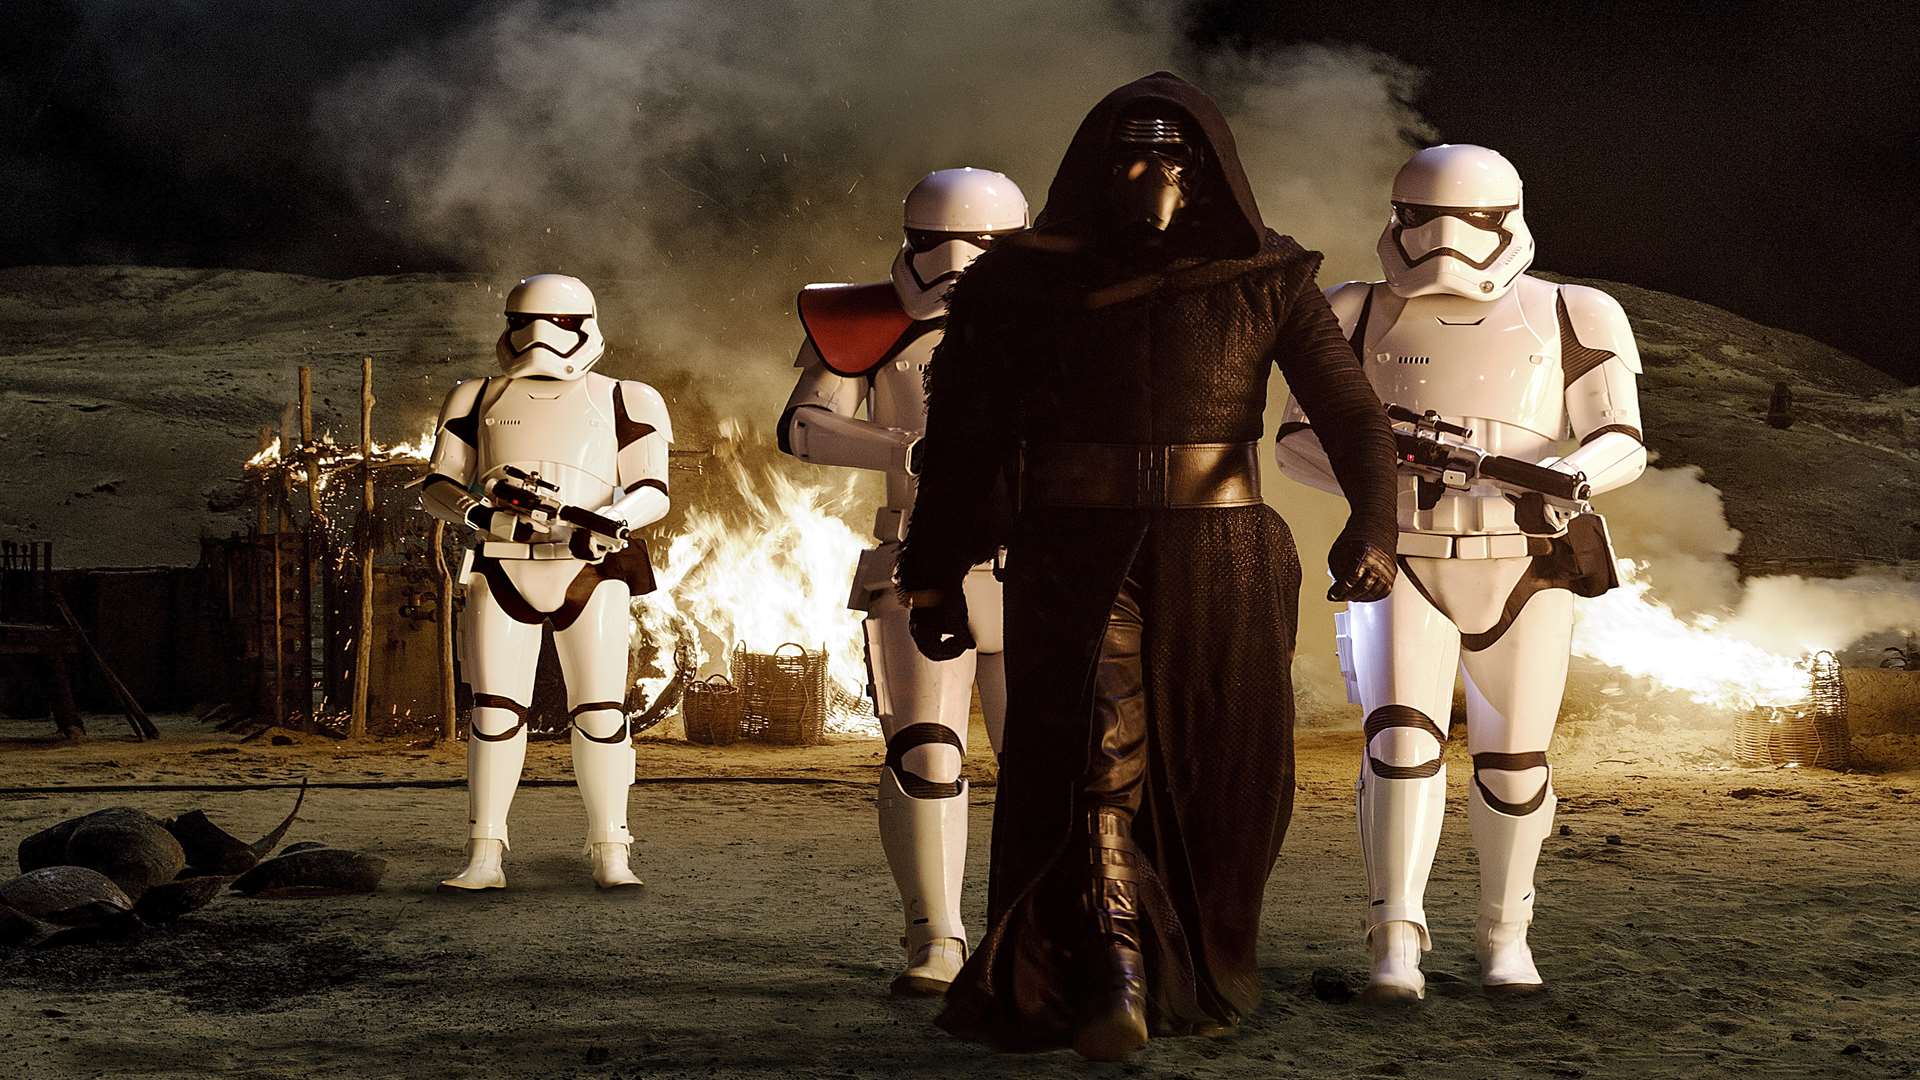 The Force Awakens is the seventh instalment in the Star Wars series